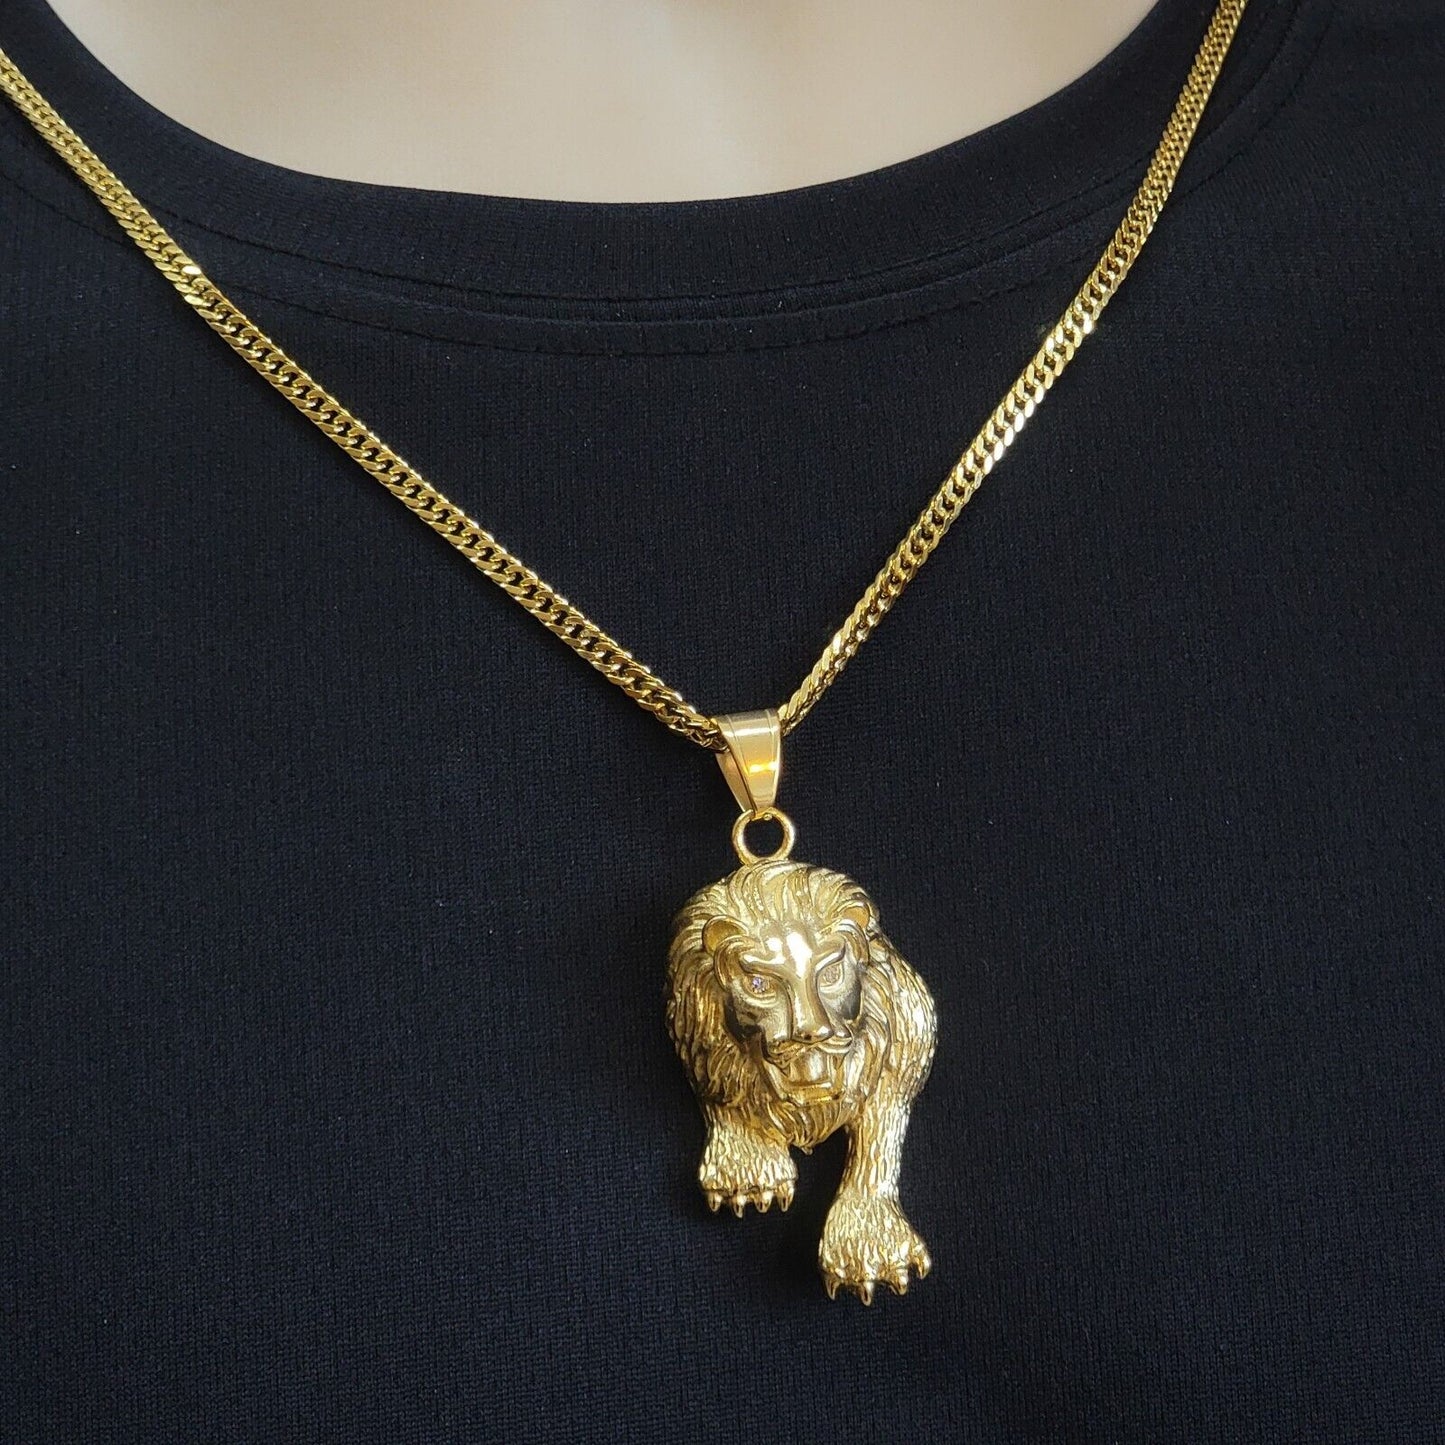 Necklaces - Stainless Steel Gold Plated. 3D Prowl Lion Pendant & Chain